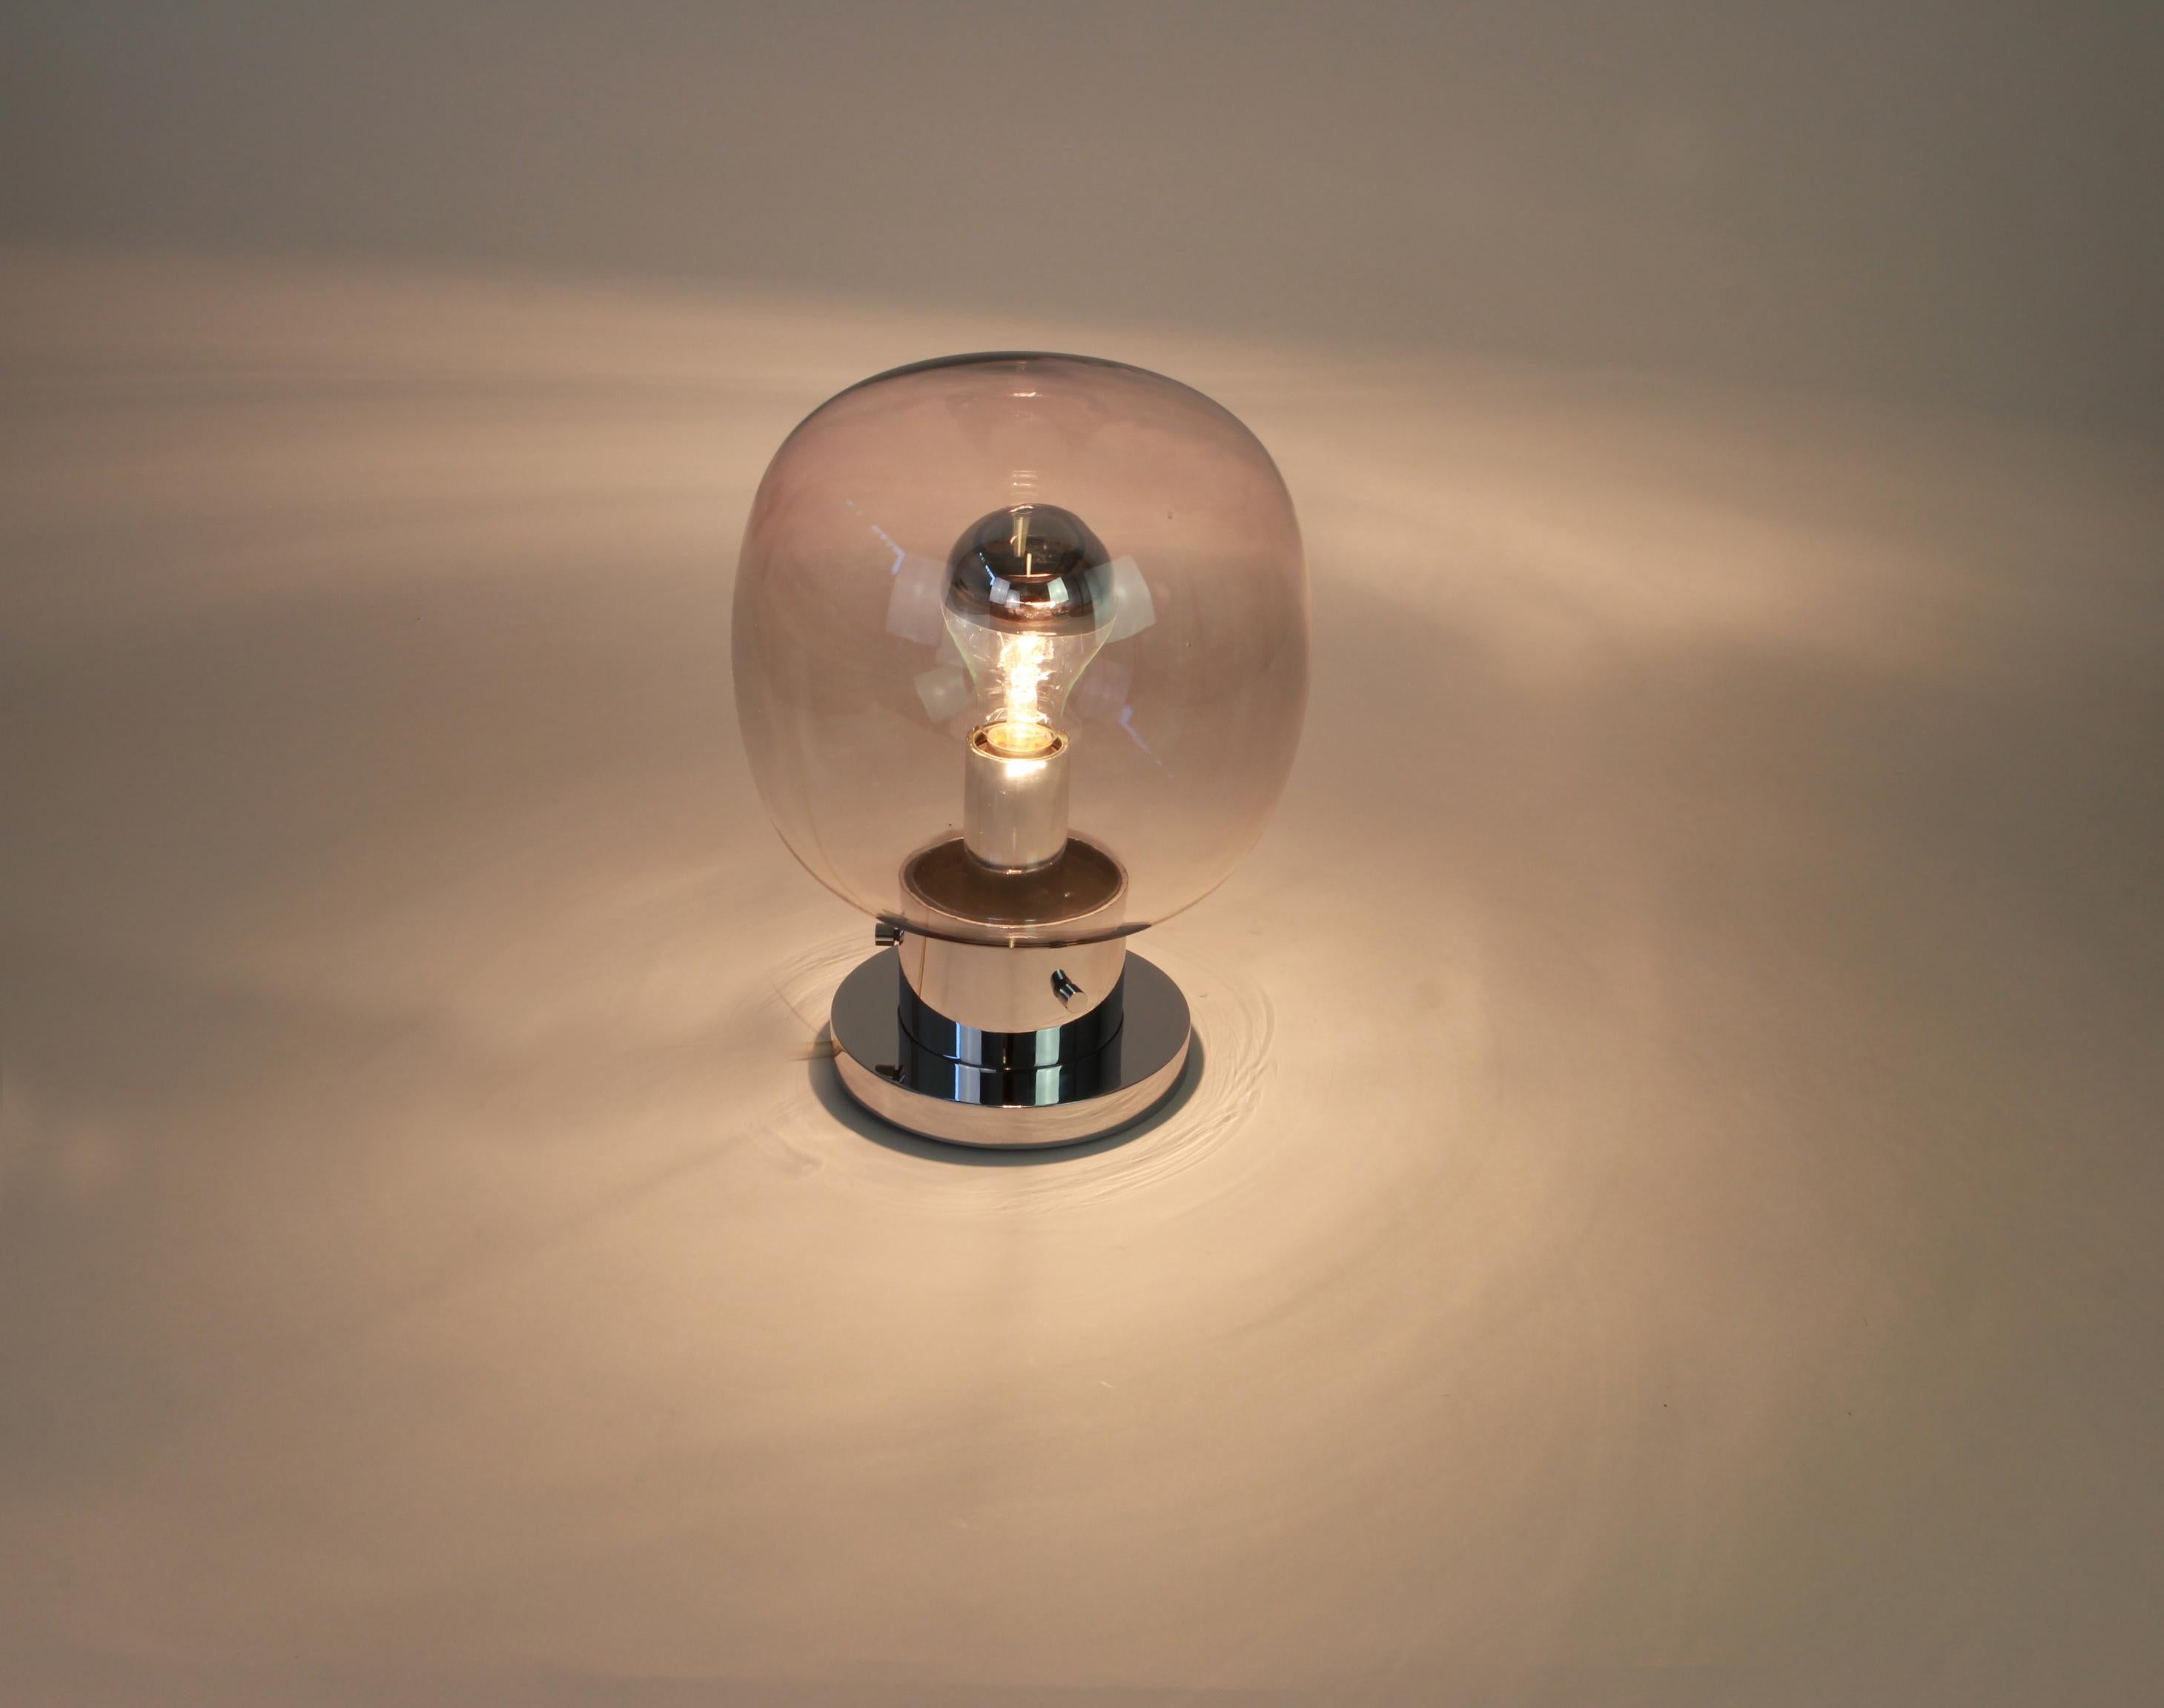 Stunning midcentury ceiling or wall lamp in Ball shape, by Glashütte Limburg, Germany, 1970s.
Made of smoked glass and chrome.
Sockets: It needs 1 x E27 standard bulb and function on voltage from 110 till 240 volts.
Very good condition. Wonderful